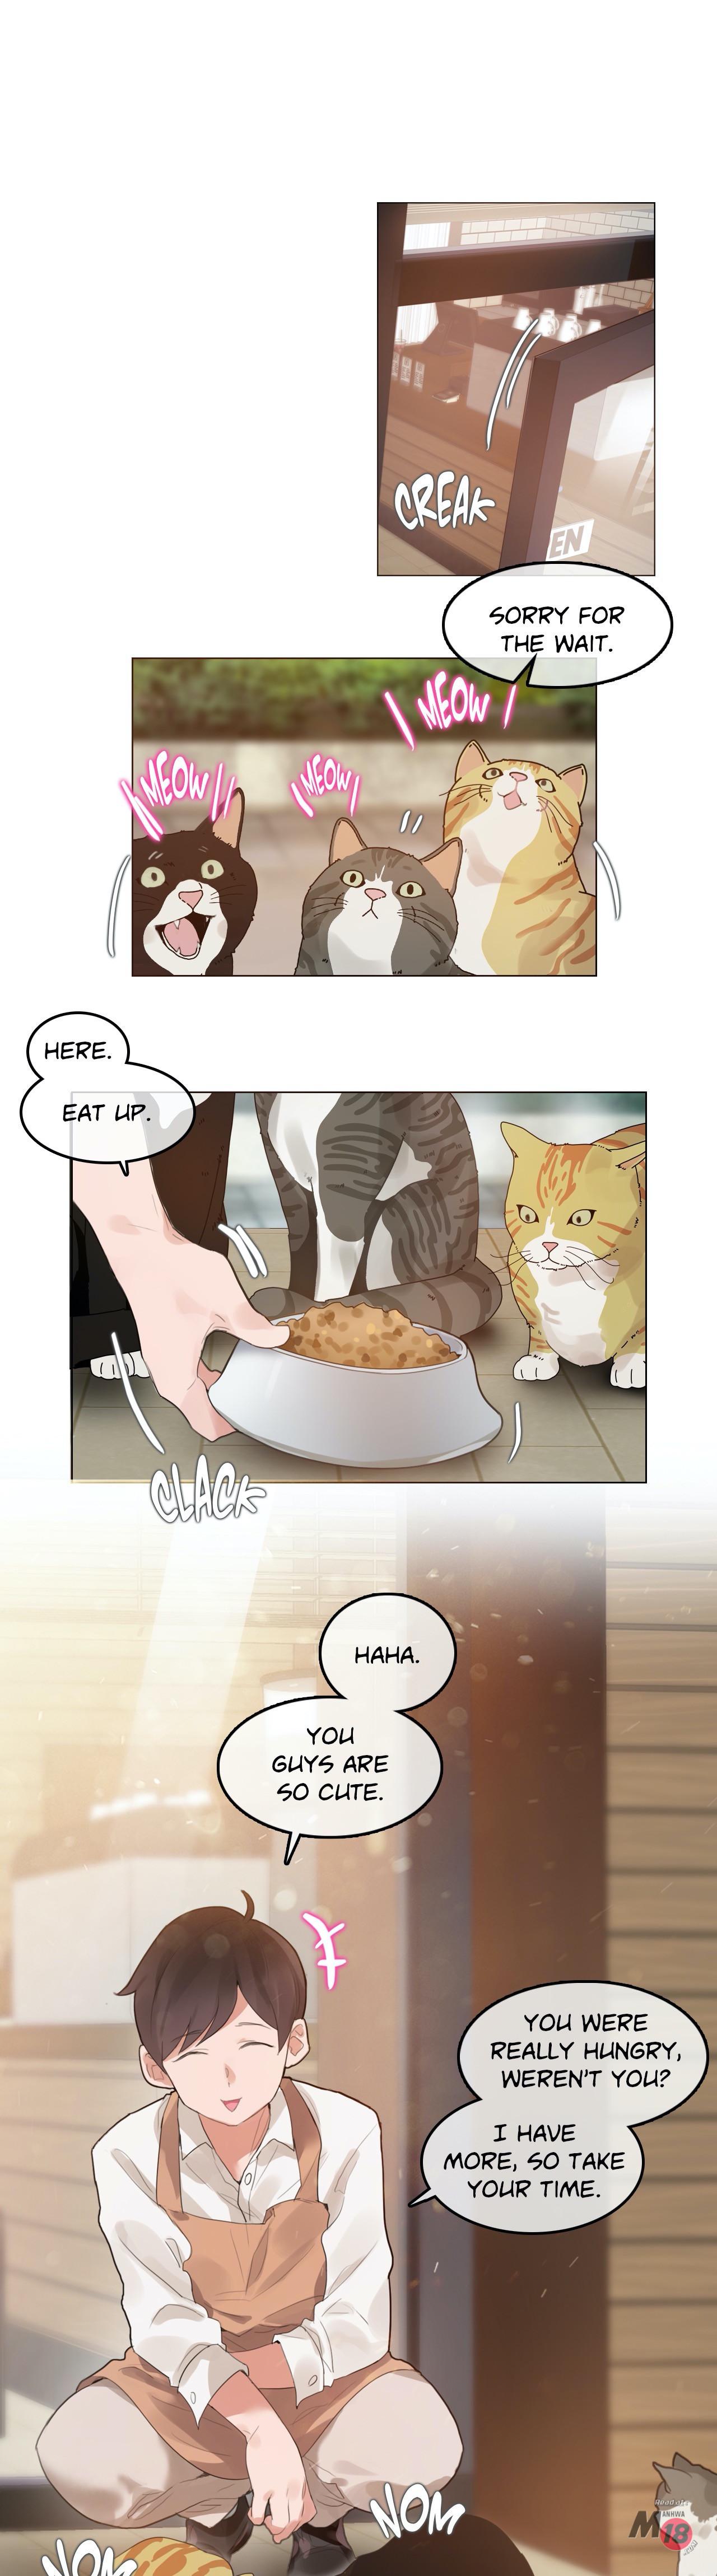 Perverts' Daily Lives Episode 1: Her Secret Recipe Ch1-19 0